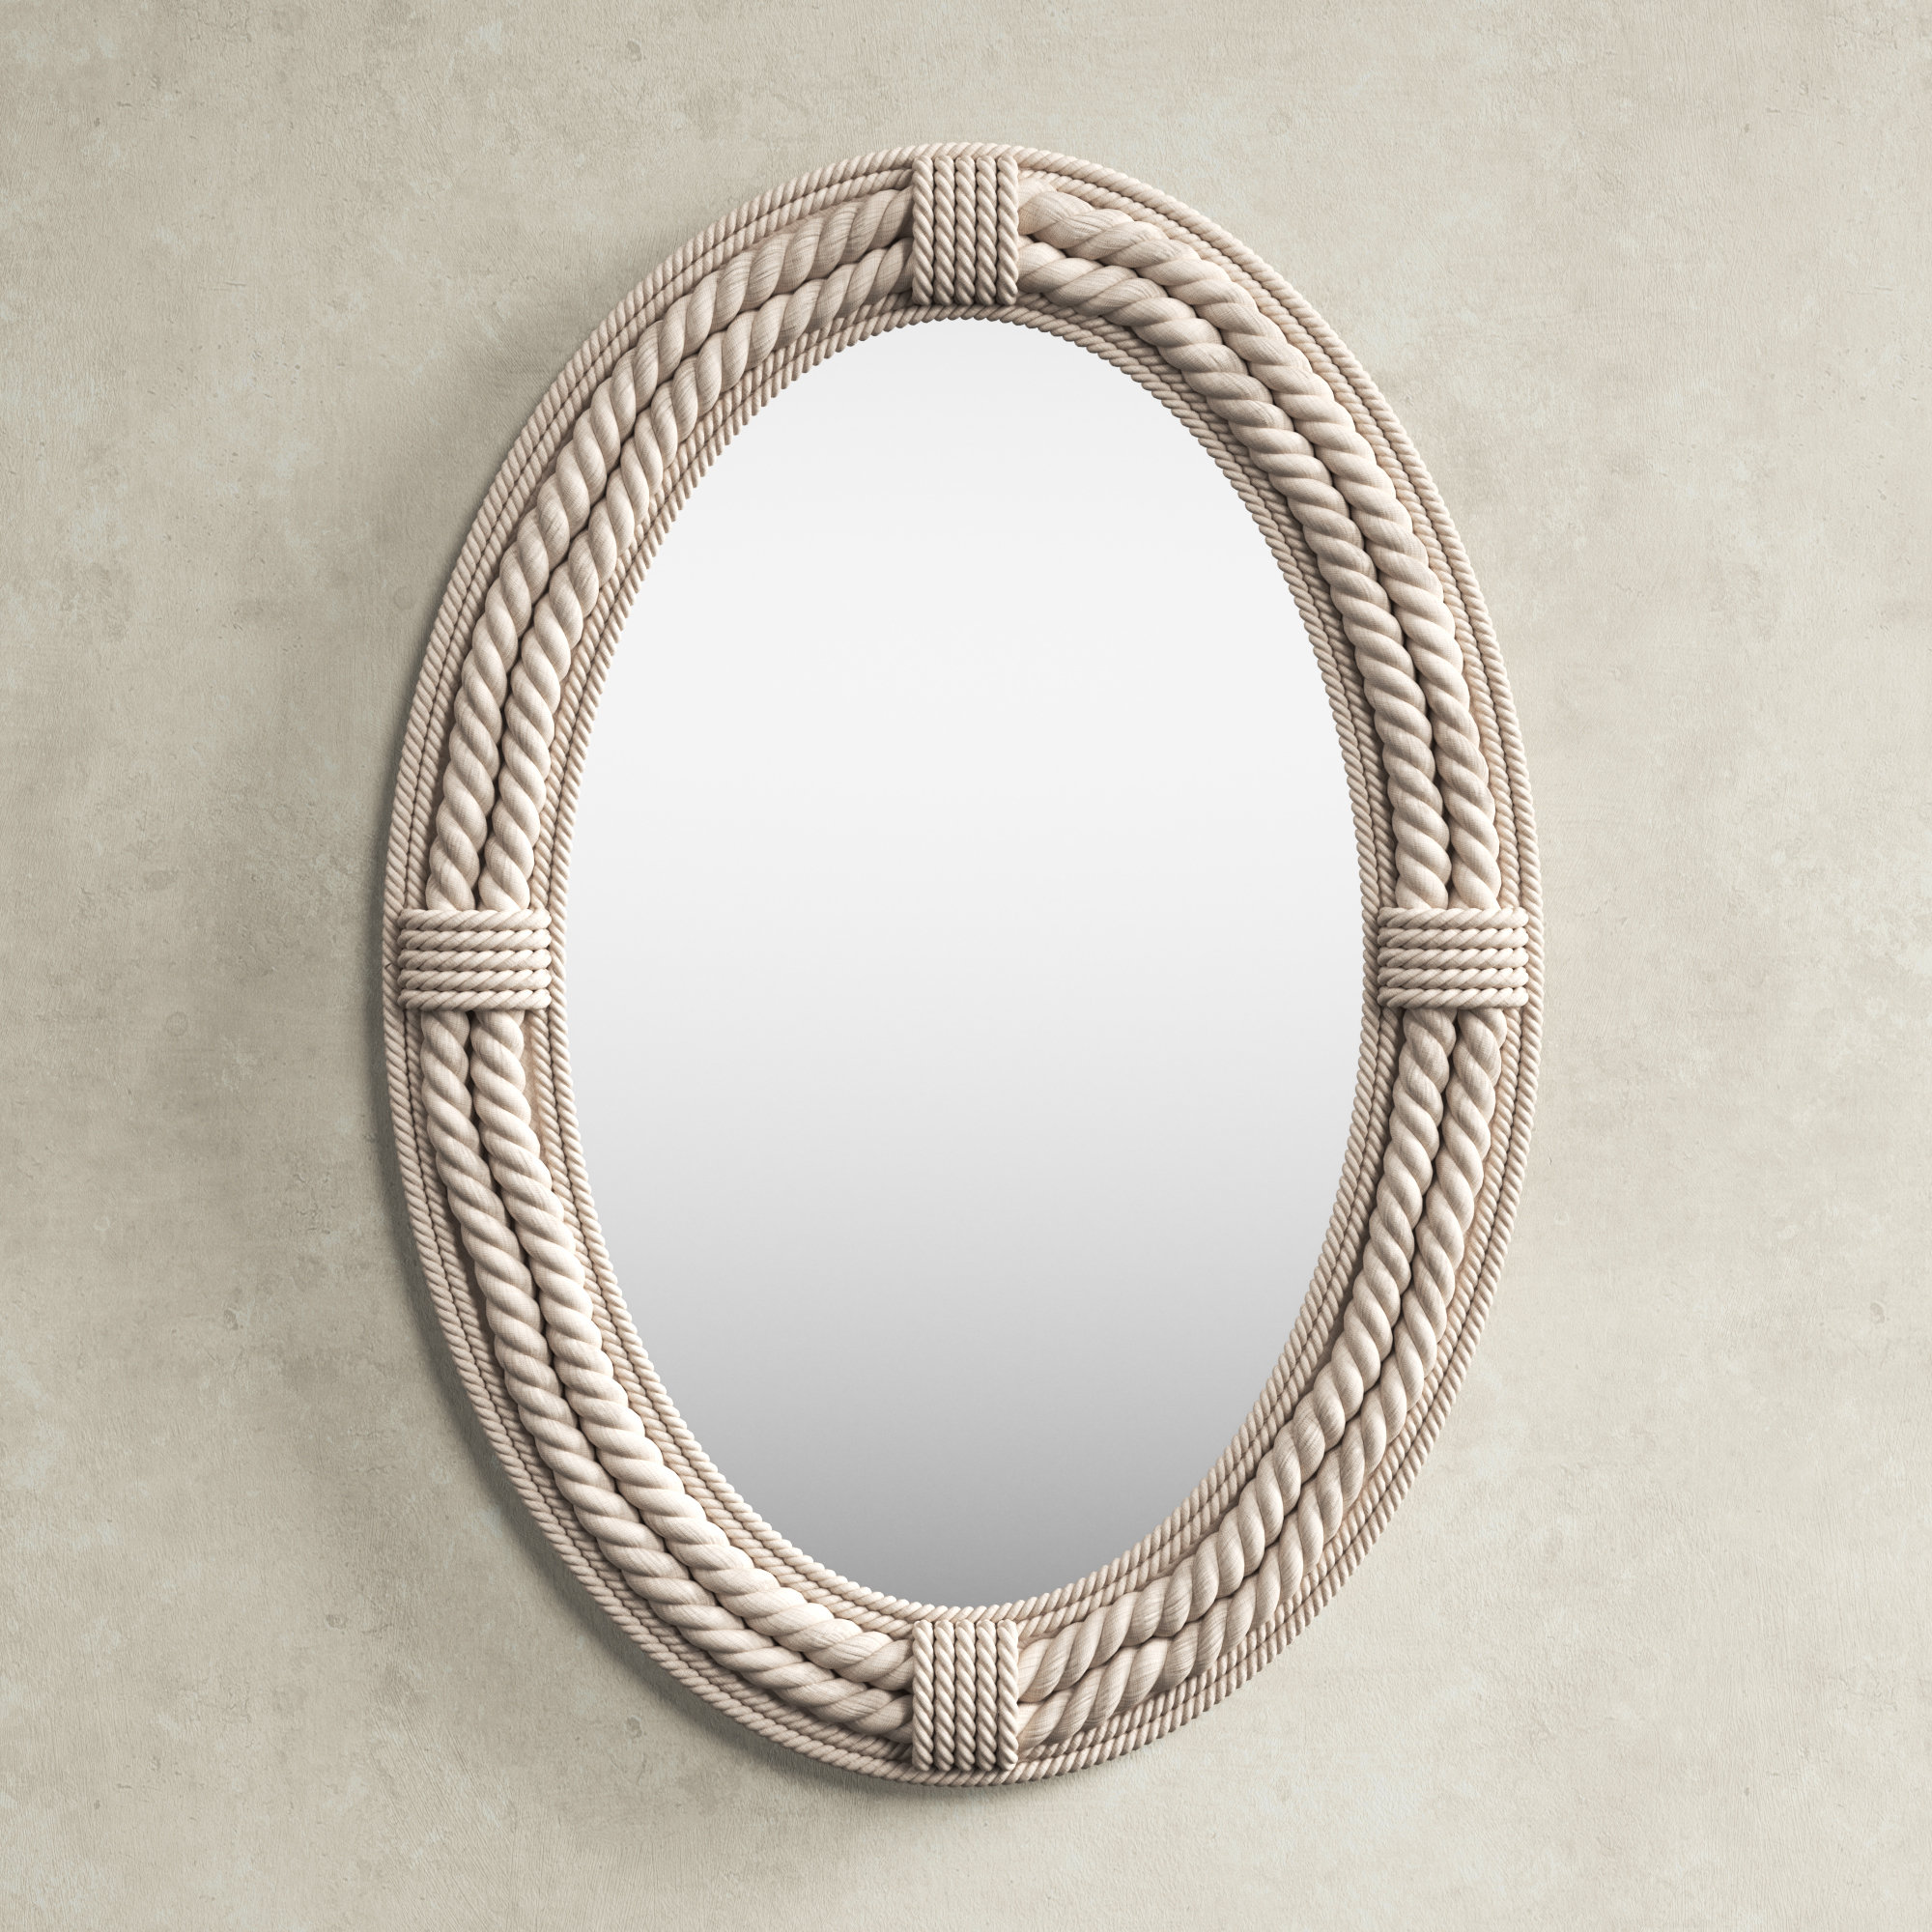 Mirror Framed Rope Wrapped Oval Wall Hanging Home Decor Accent 24.75 X 16.50 In 